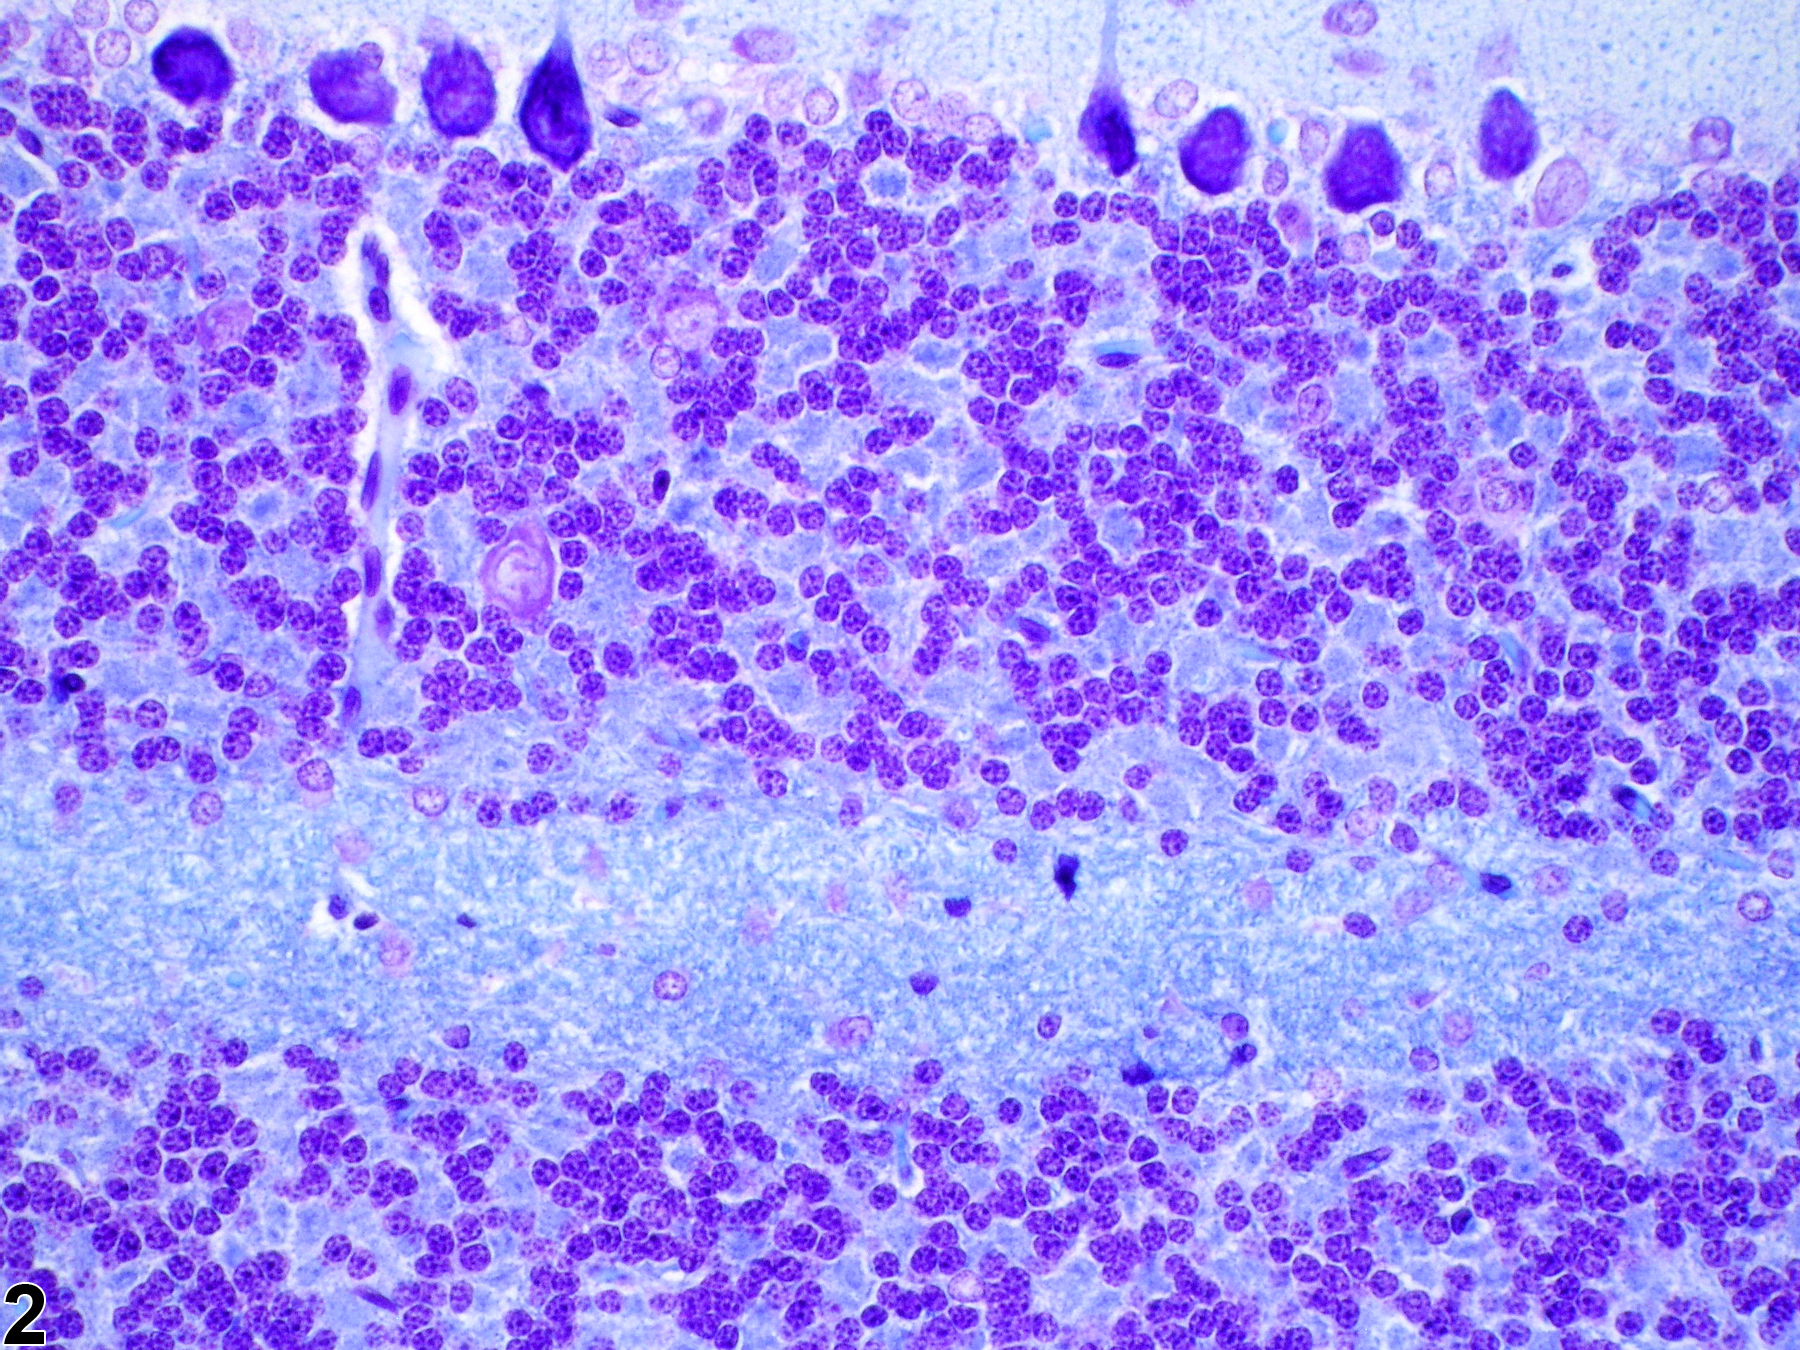 Image of intramyelinic edema in the brain from a  rat